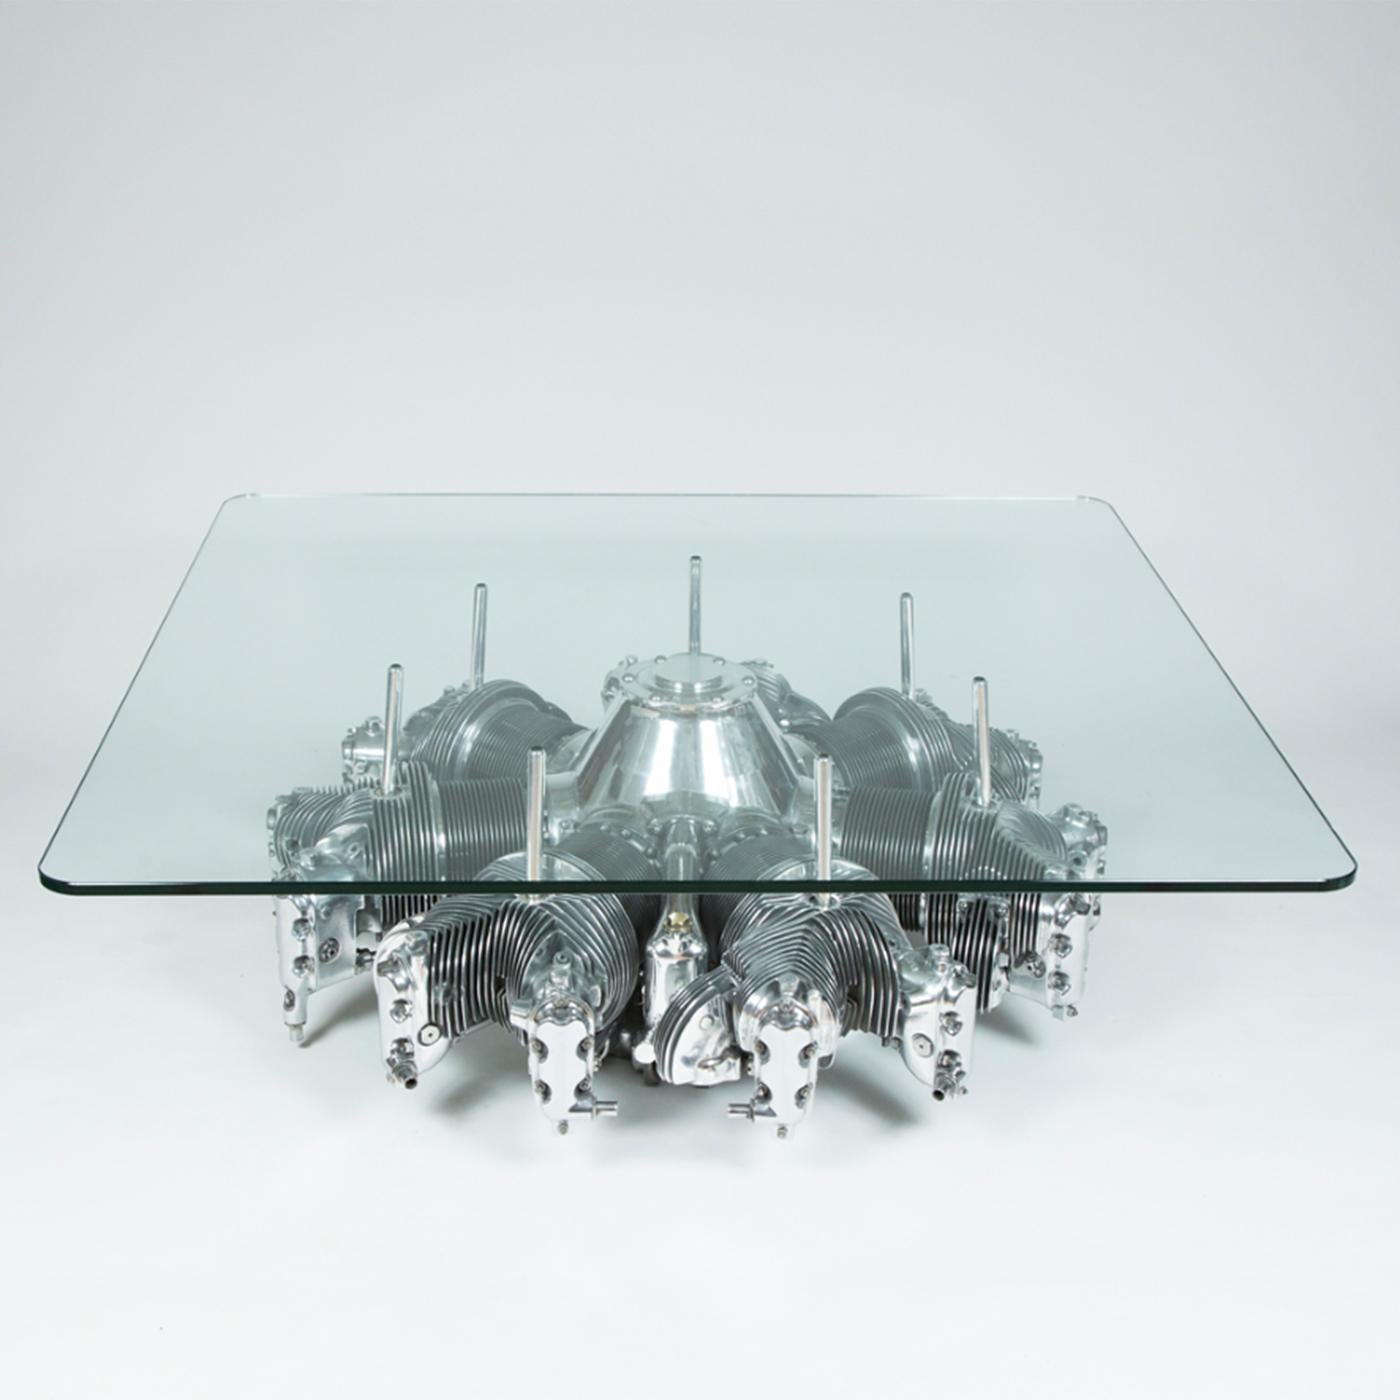 Coffee table continental radial engine, with the
R-670 radial continental engine, 7 cylinders made
by Continental Motors Inc. With clear glass top with
rounded corners, 15mm thickness.
Measures: Engine diameter 110cm.
Glass top: L 122 x D